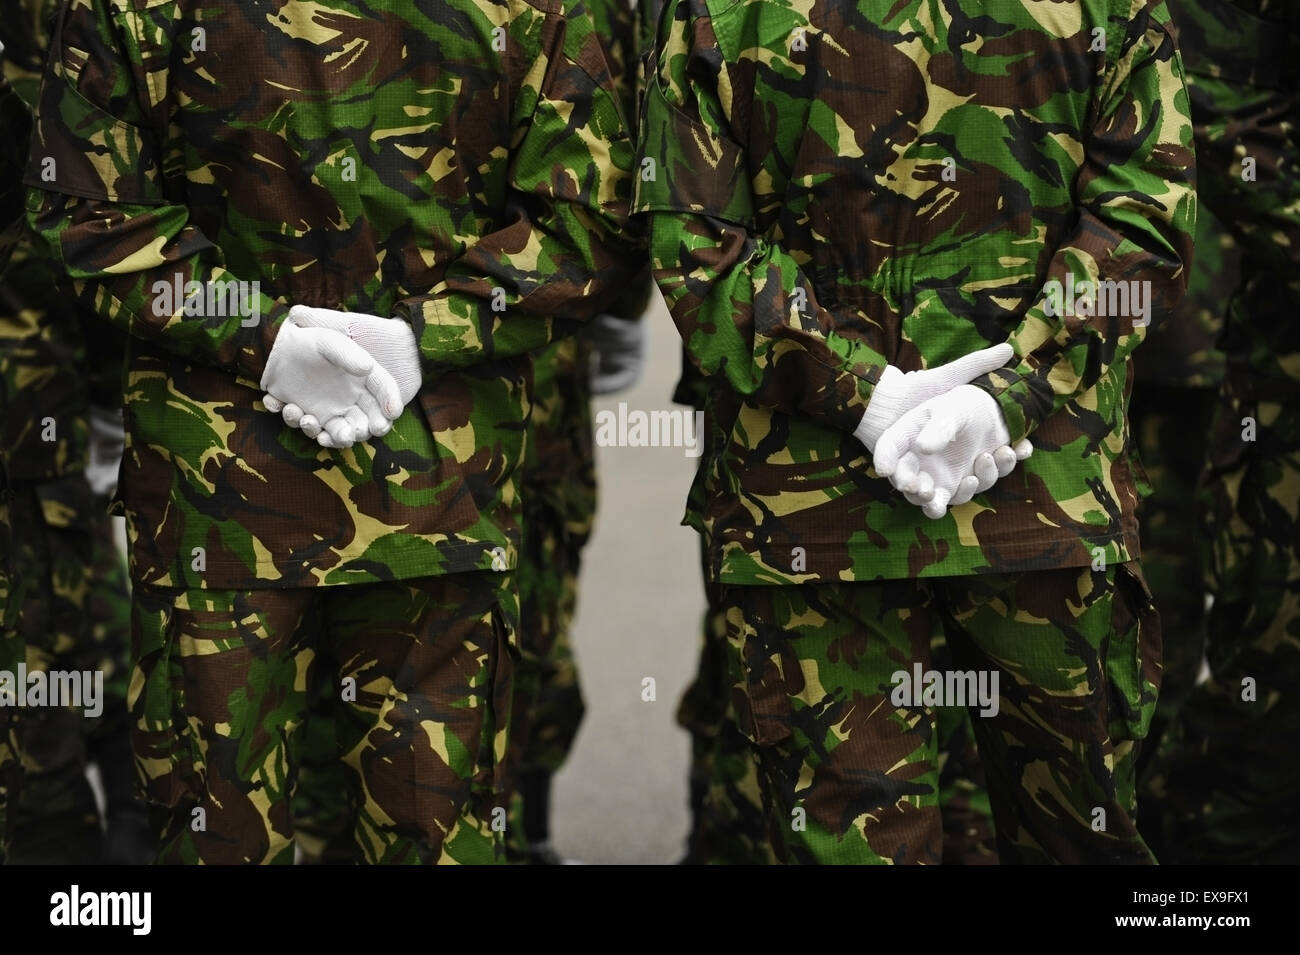 Detail shot with two soldiers in camouflage uniform with their hands on their backs Stock Photo